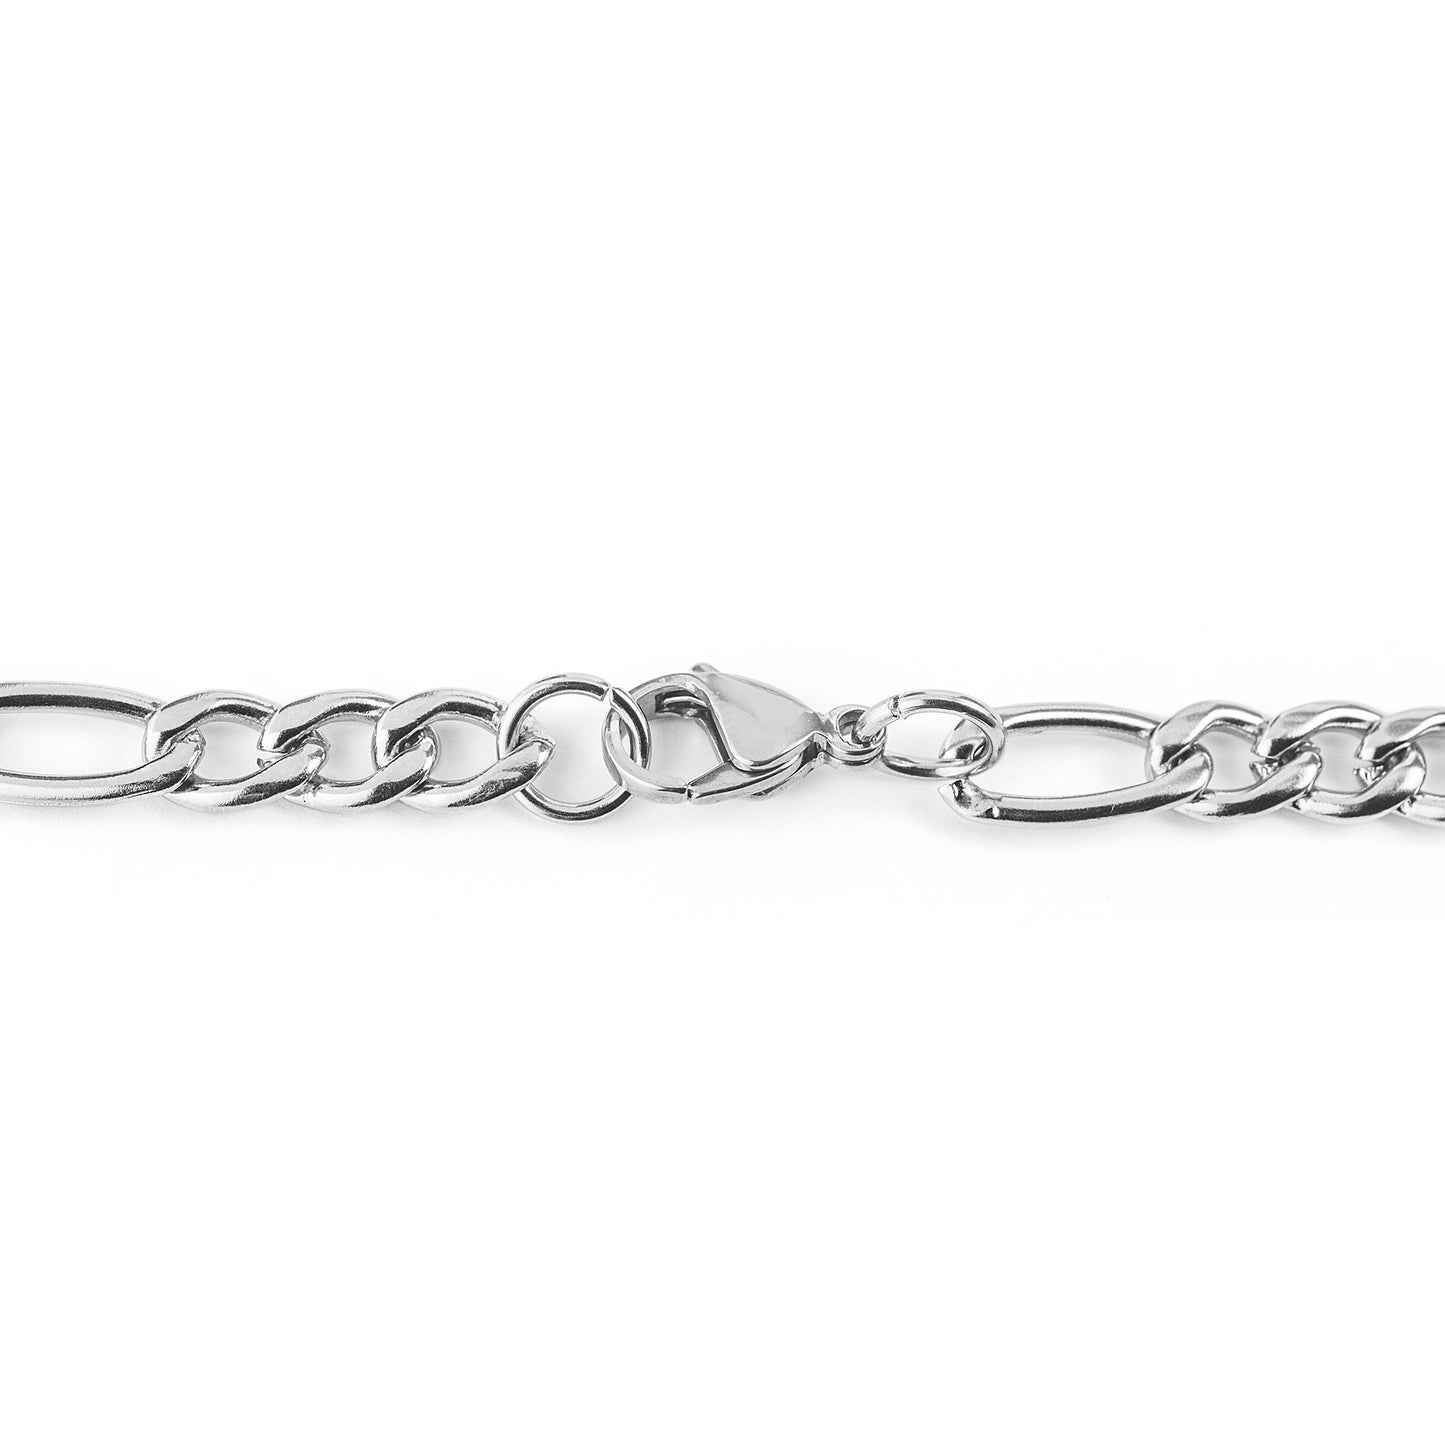 Men's Polished Figaro Chain Stainless Steel Necklace (7mm) - 24"